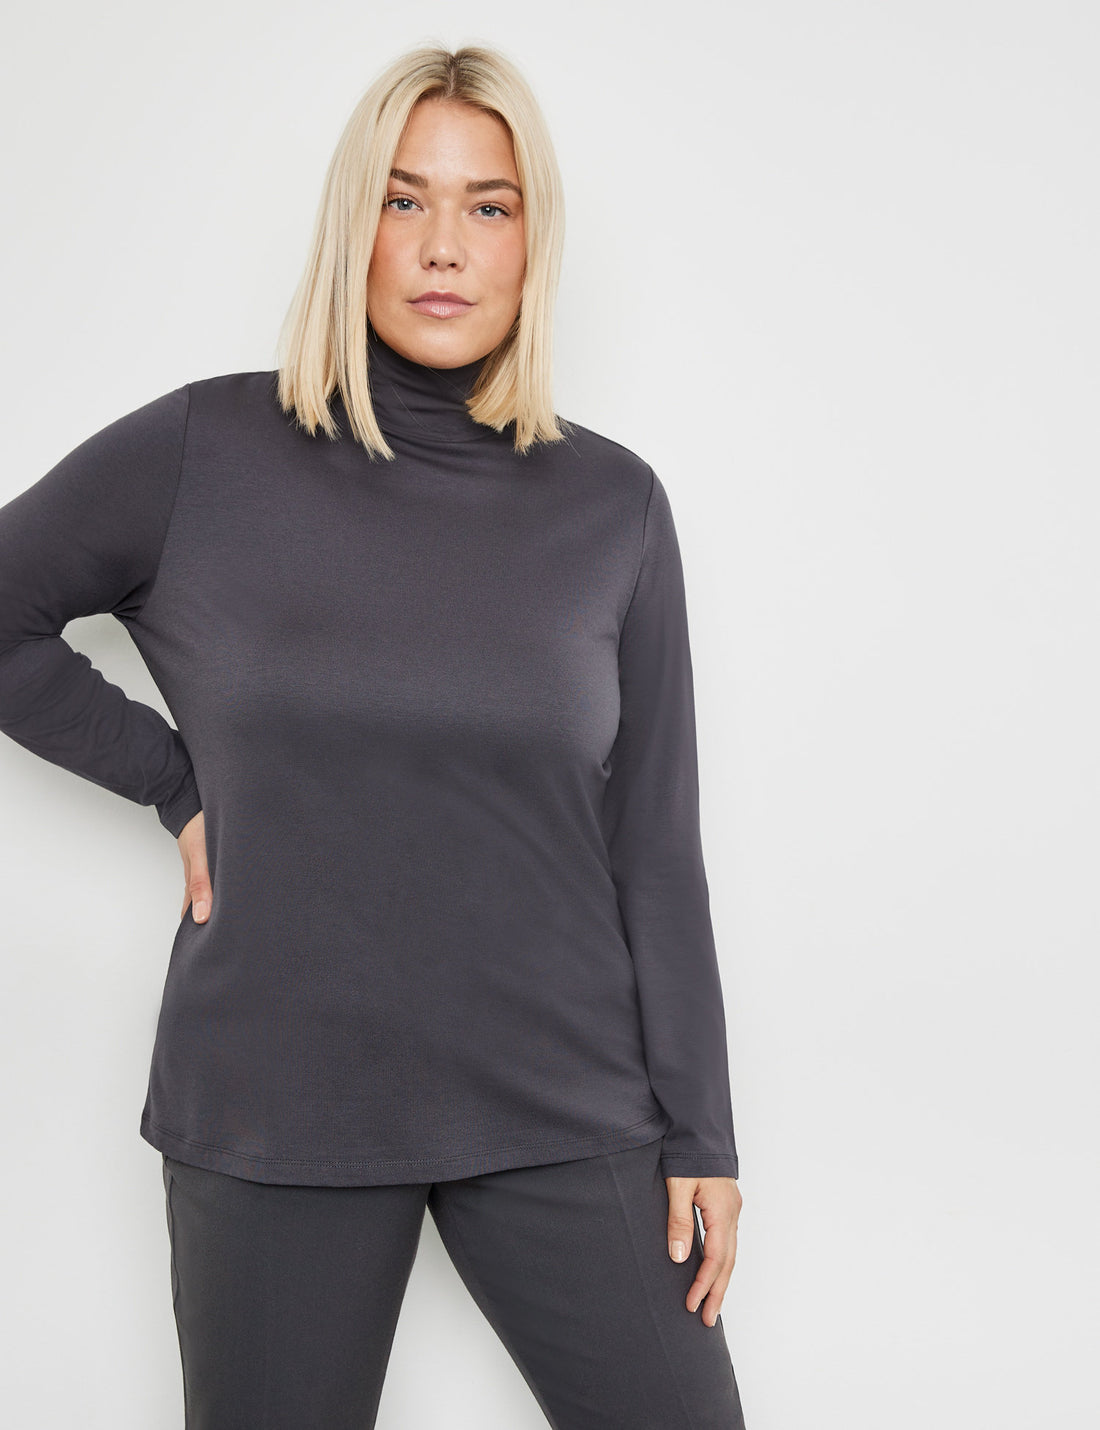 Long Sleeve Top With A Stand-Up Collar_371256-26426_2220_01